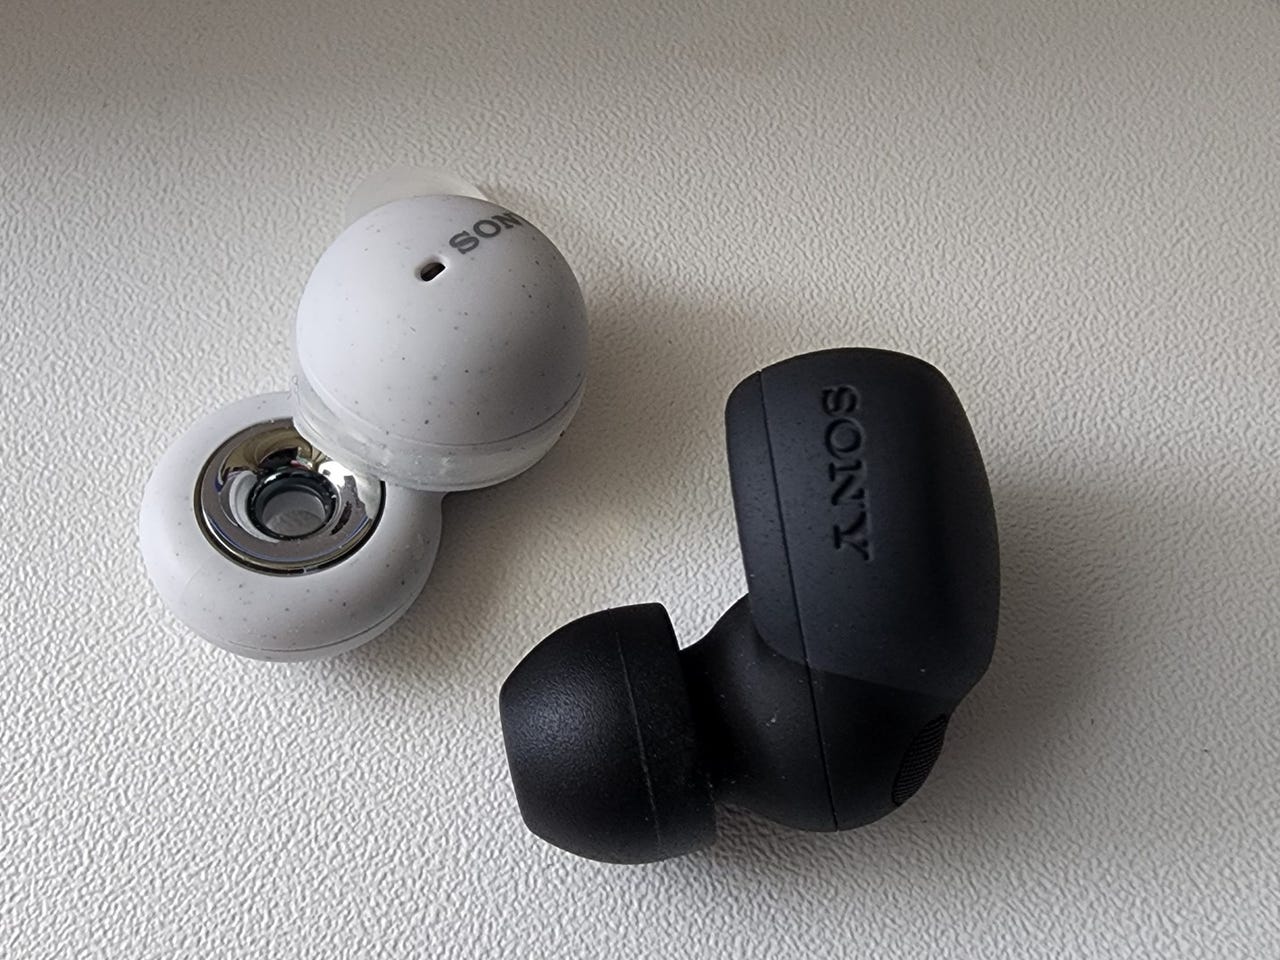 Review: Sony Linkbuds S